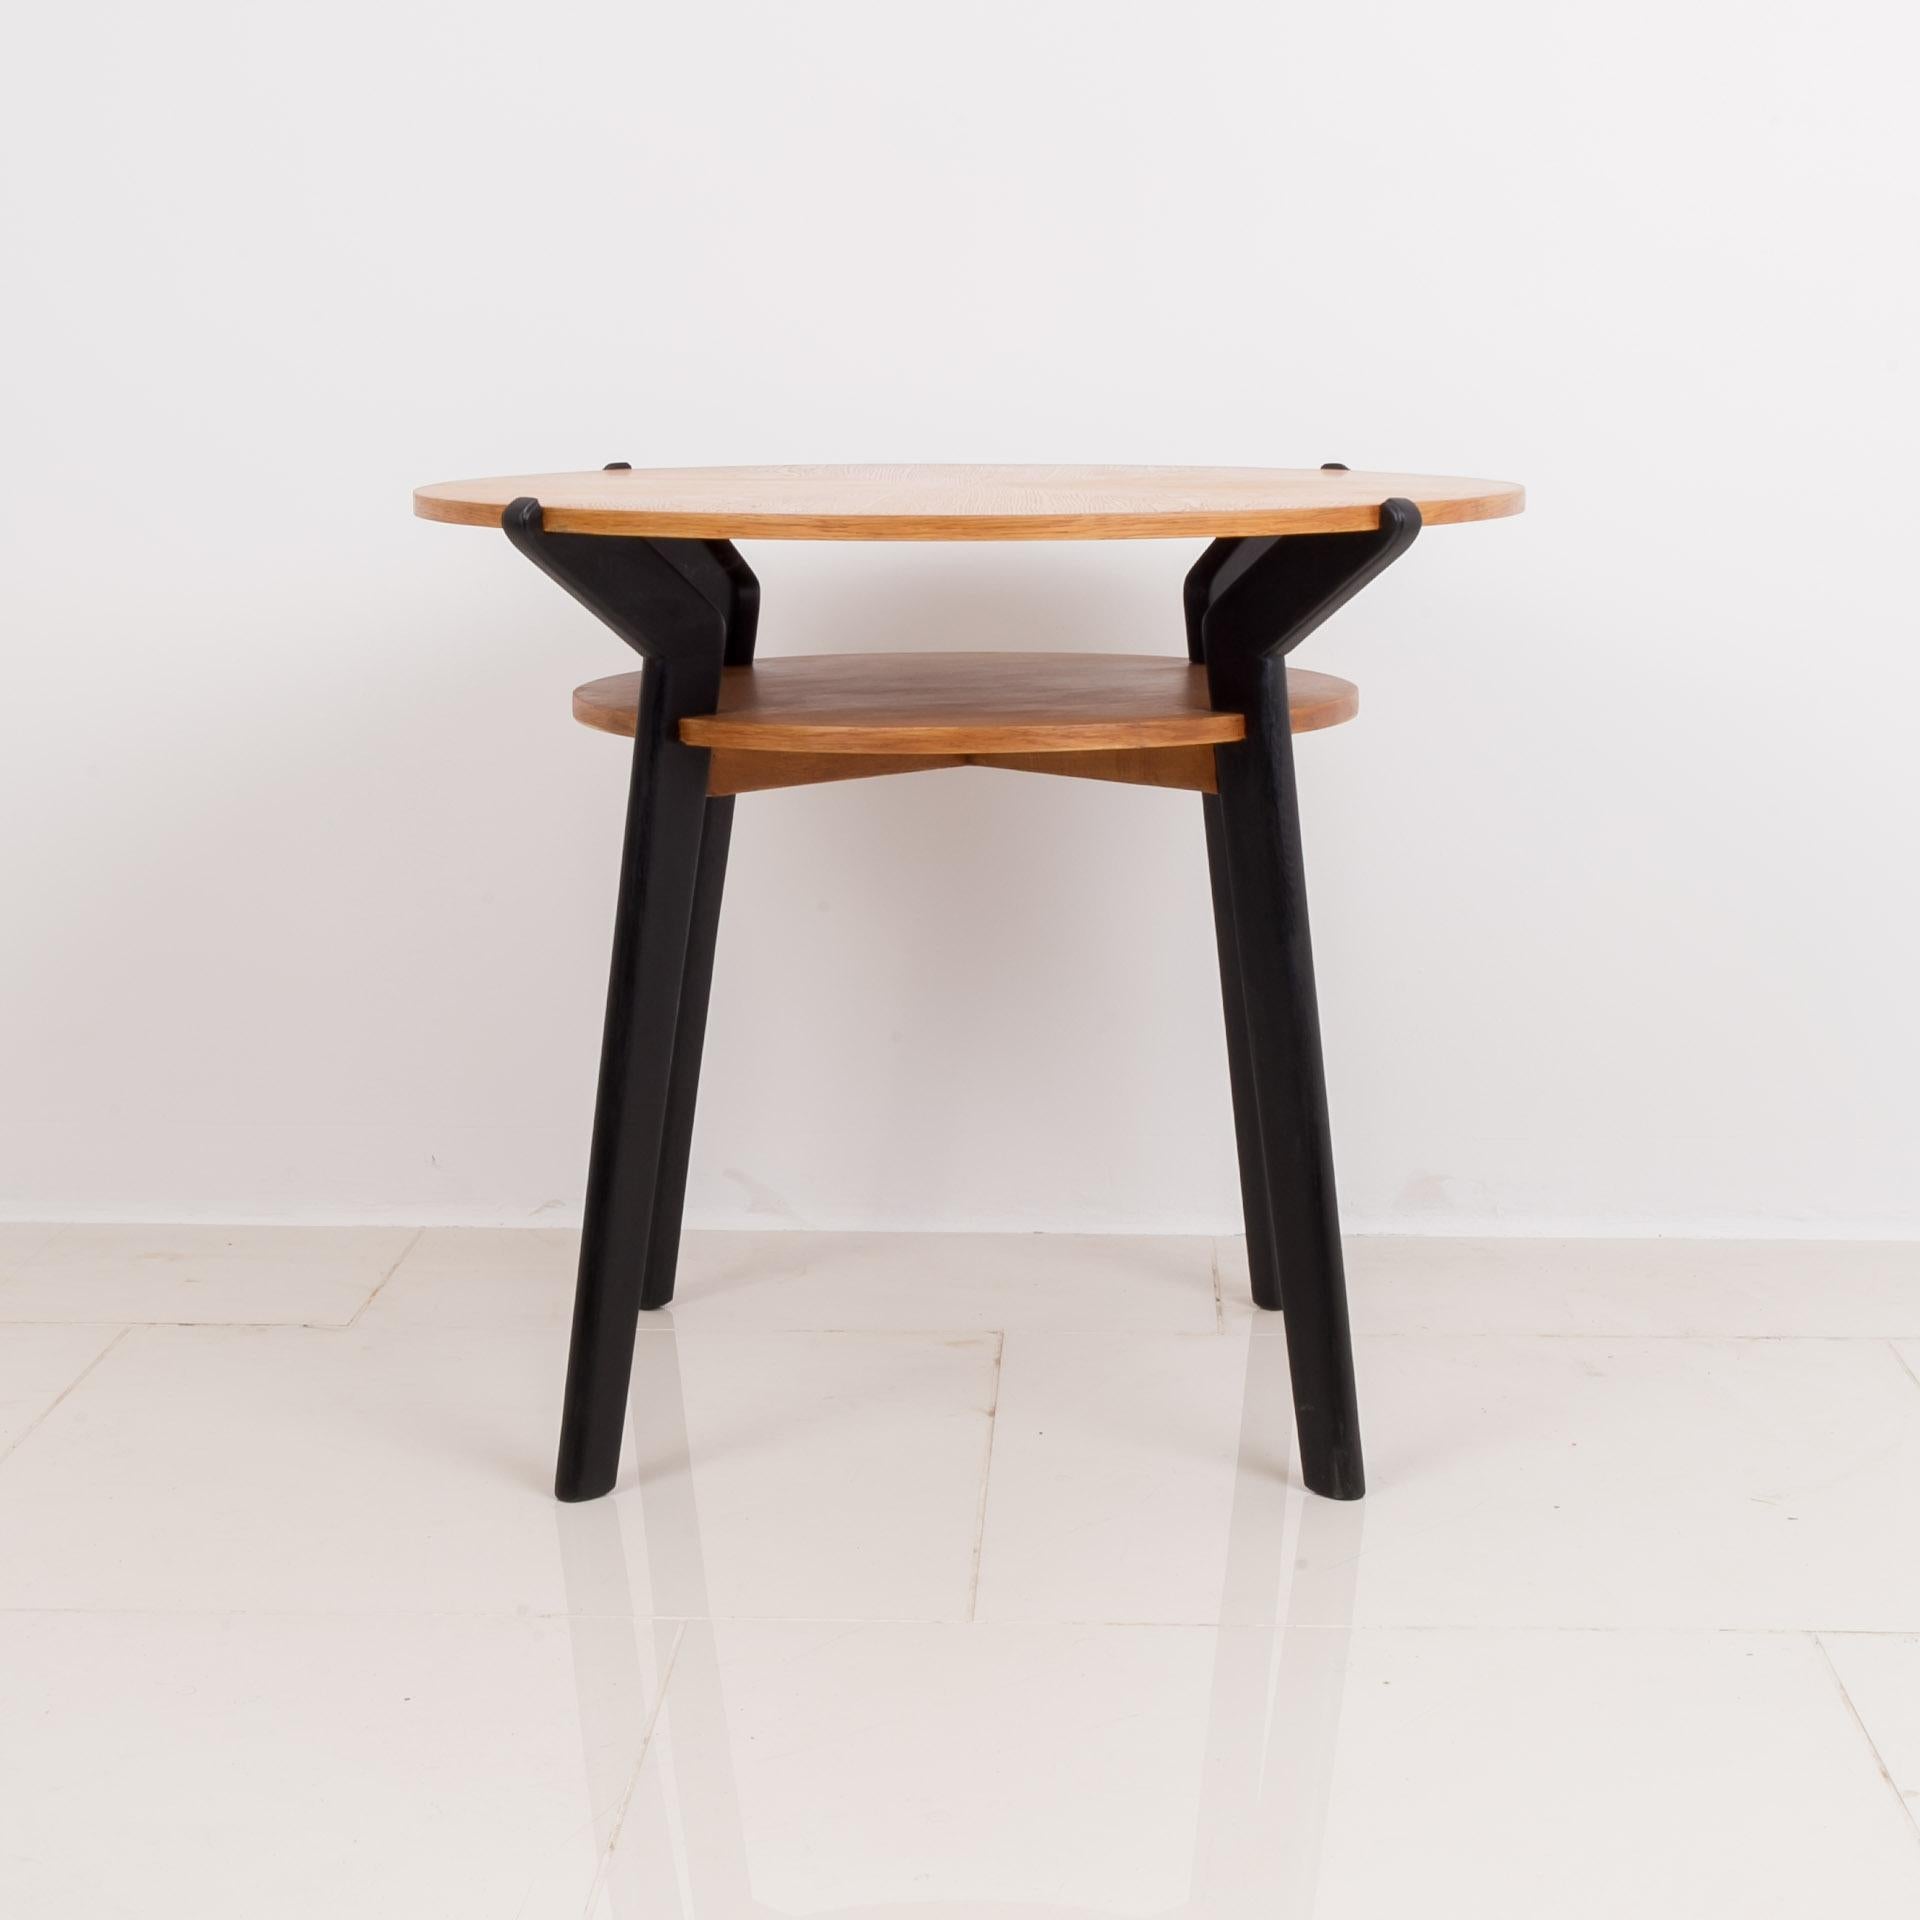 This beautiful coffee table was made in Czechoslovakia by famous manufacturer Interier Praha in 1950s. It features 4 black legs, a round table top and round shelf beneath. It is made of oak wood. The practical shelf under the table top allows for